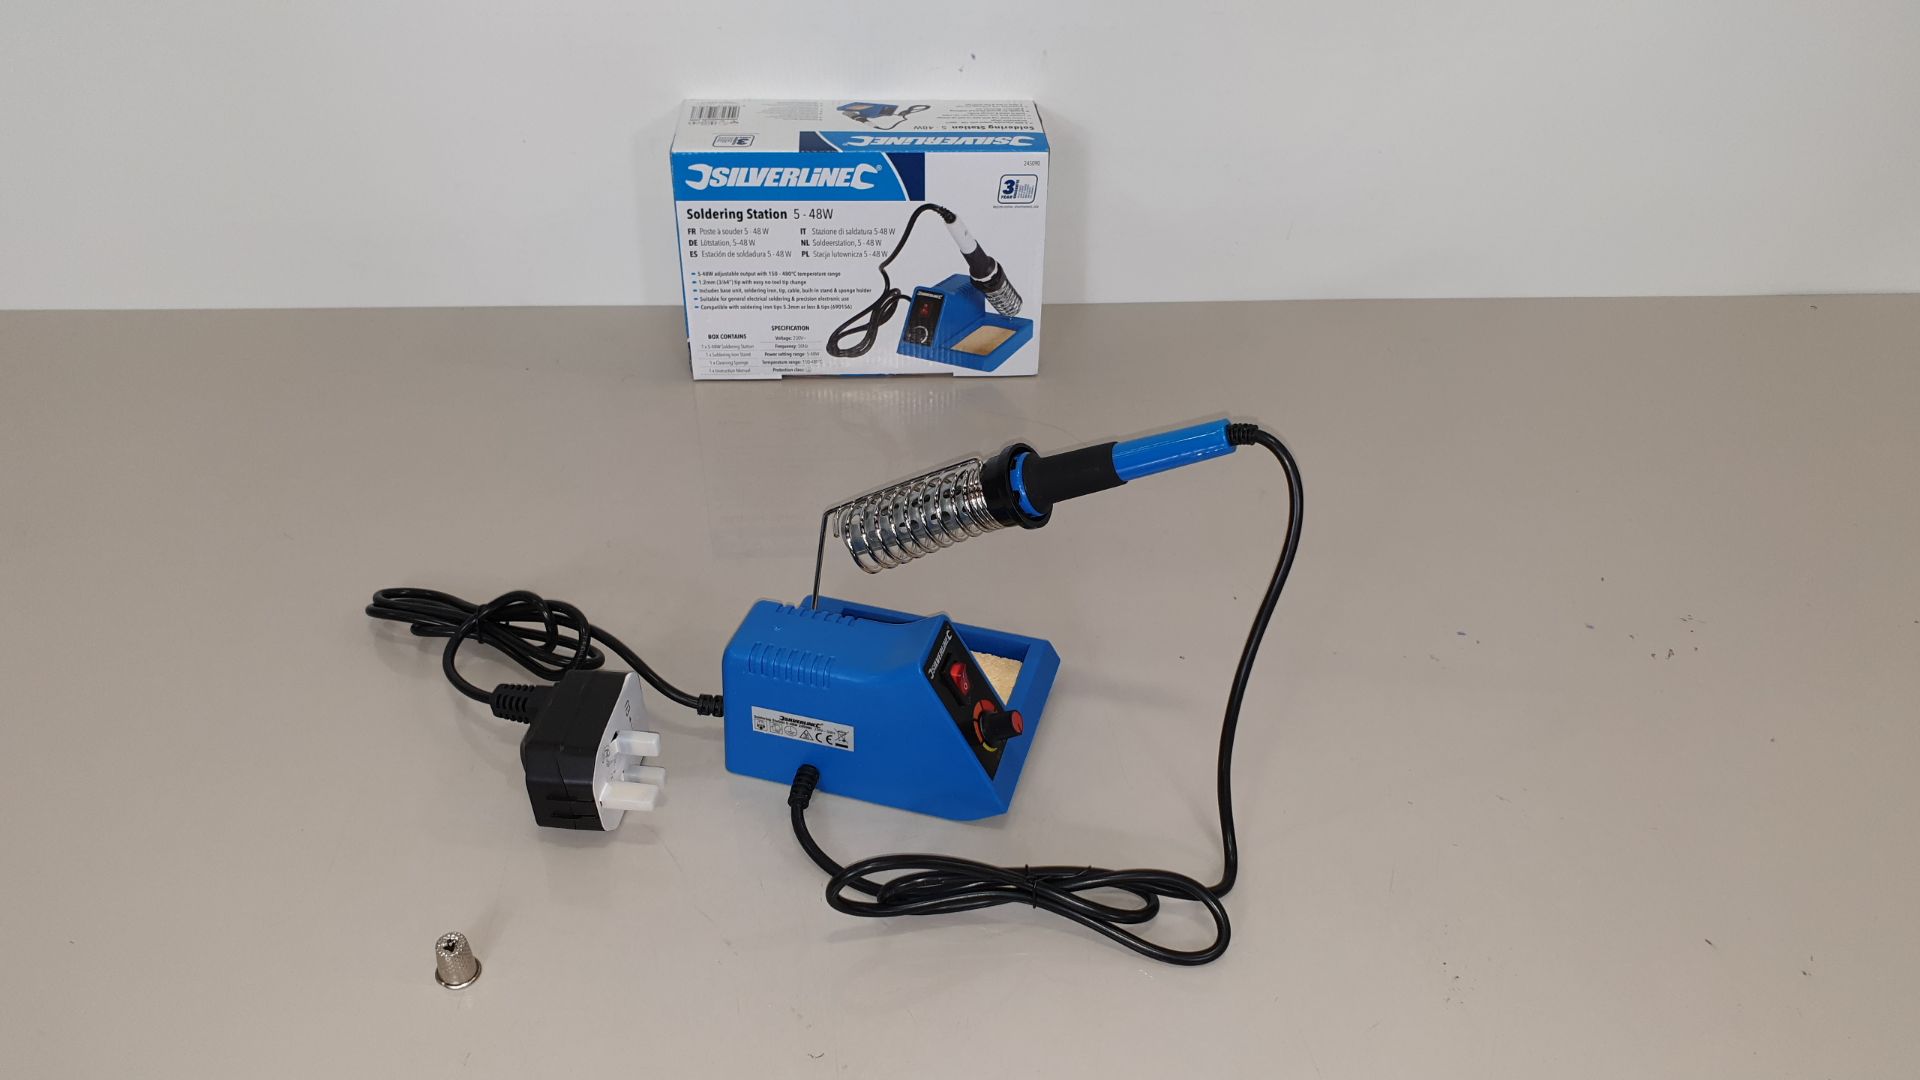 20 X BRAND NEW SILVERLINE SOLDERING STATIONS 5-48W (PROD CODE 245090) - TRADE PRICE £31.34 EACH (EXC